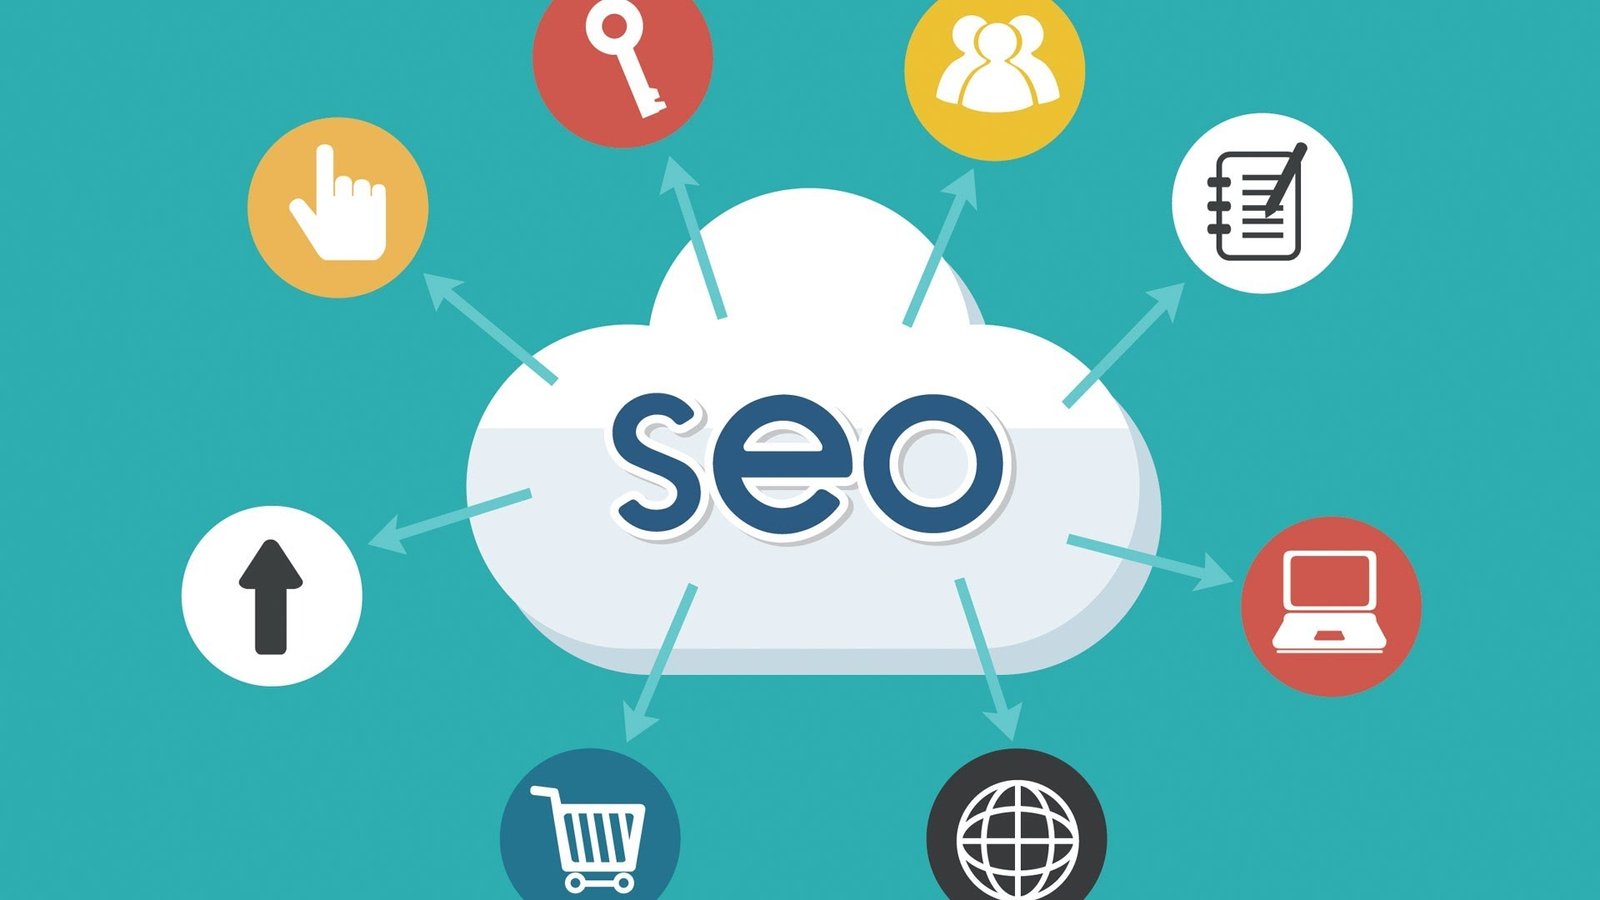 Top SEO Trends for 2023 That Will Increase Website Traffic and Lead Generation